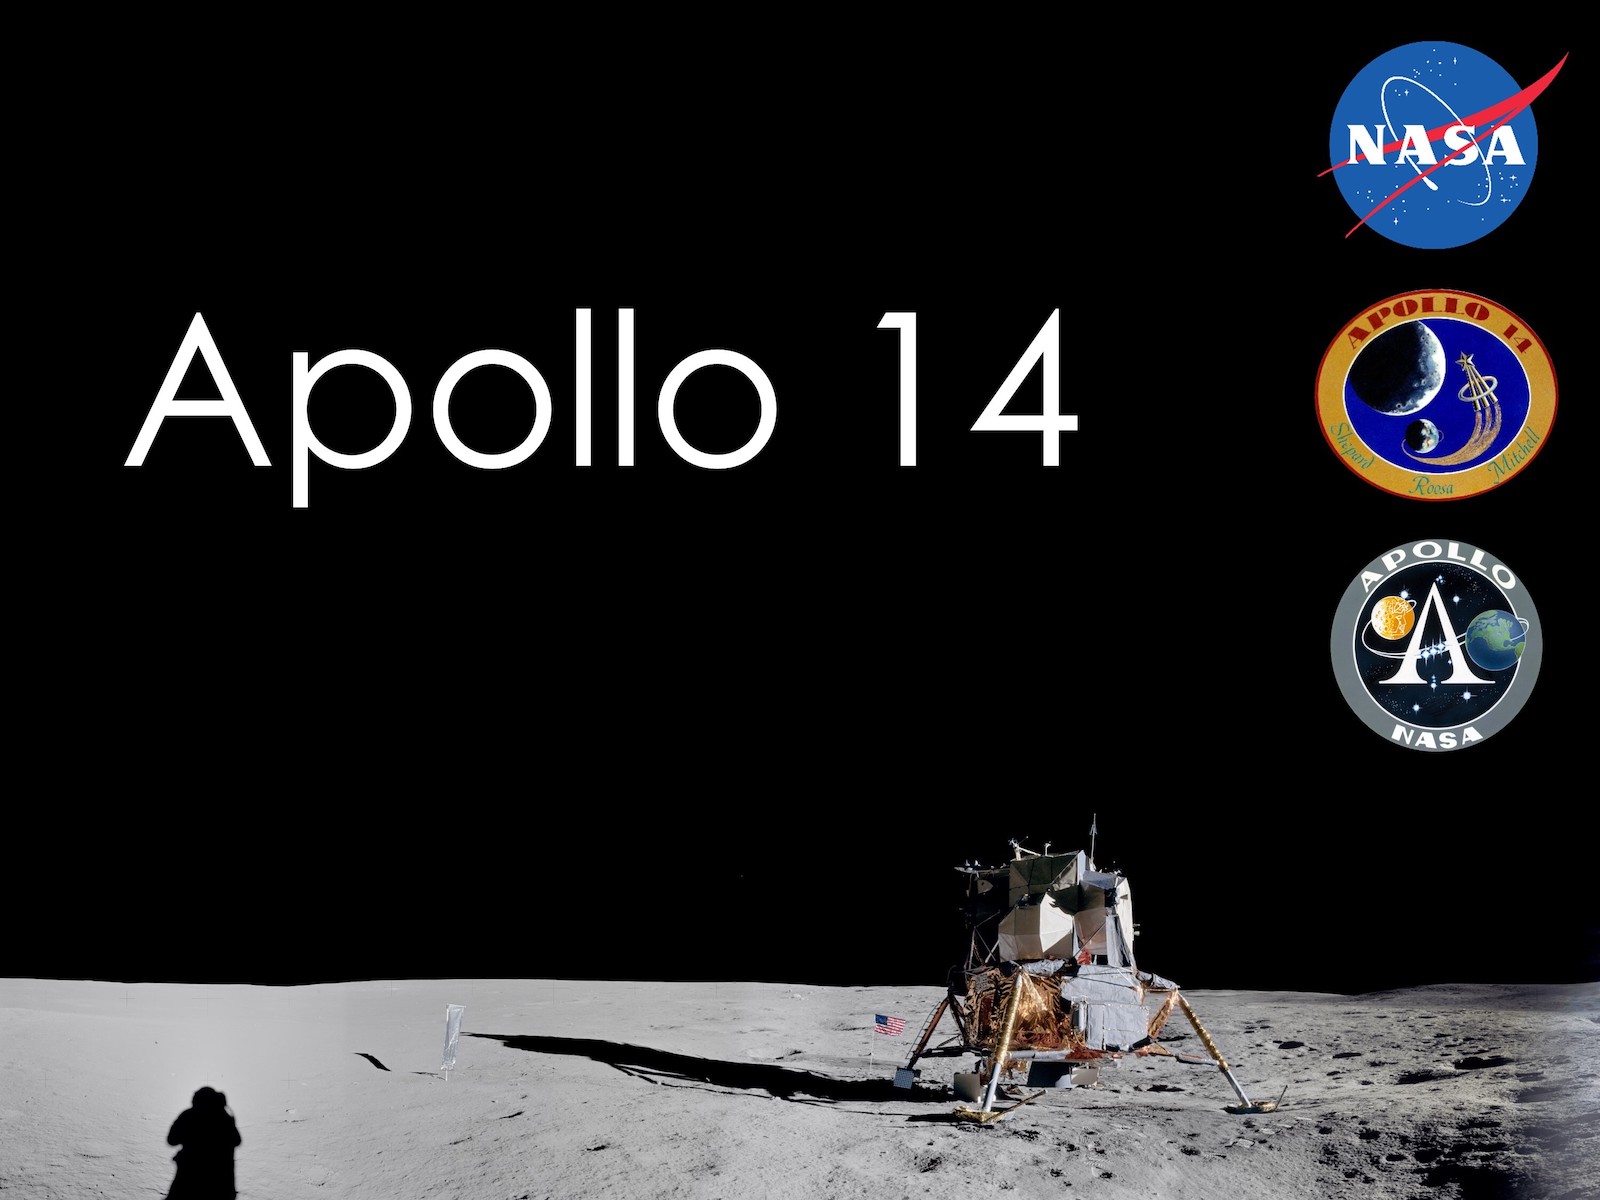 Title slide of Apollo 14 presentation. Large text reads "Apollo 14". The background shows a lander on the lunar surface, with the astronaut photographer's shadow just visible at the lower edge of the image. The NASA logo and two Apollo patches line the right-hand edge. 